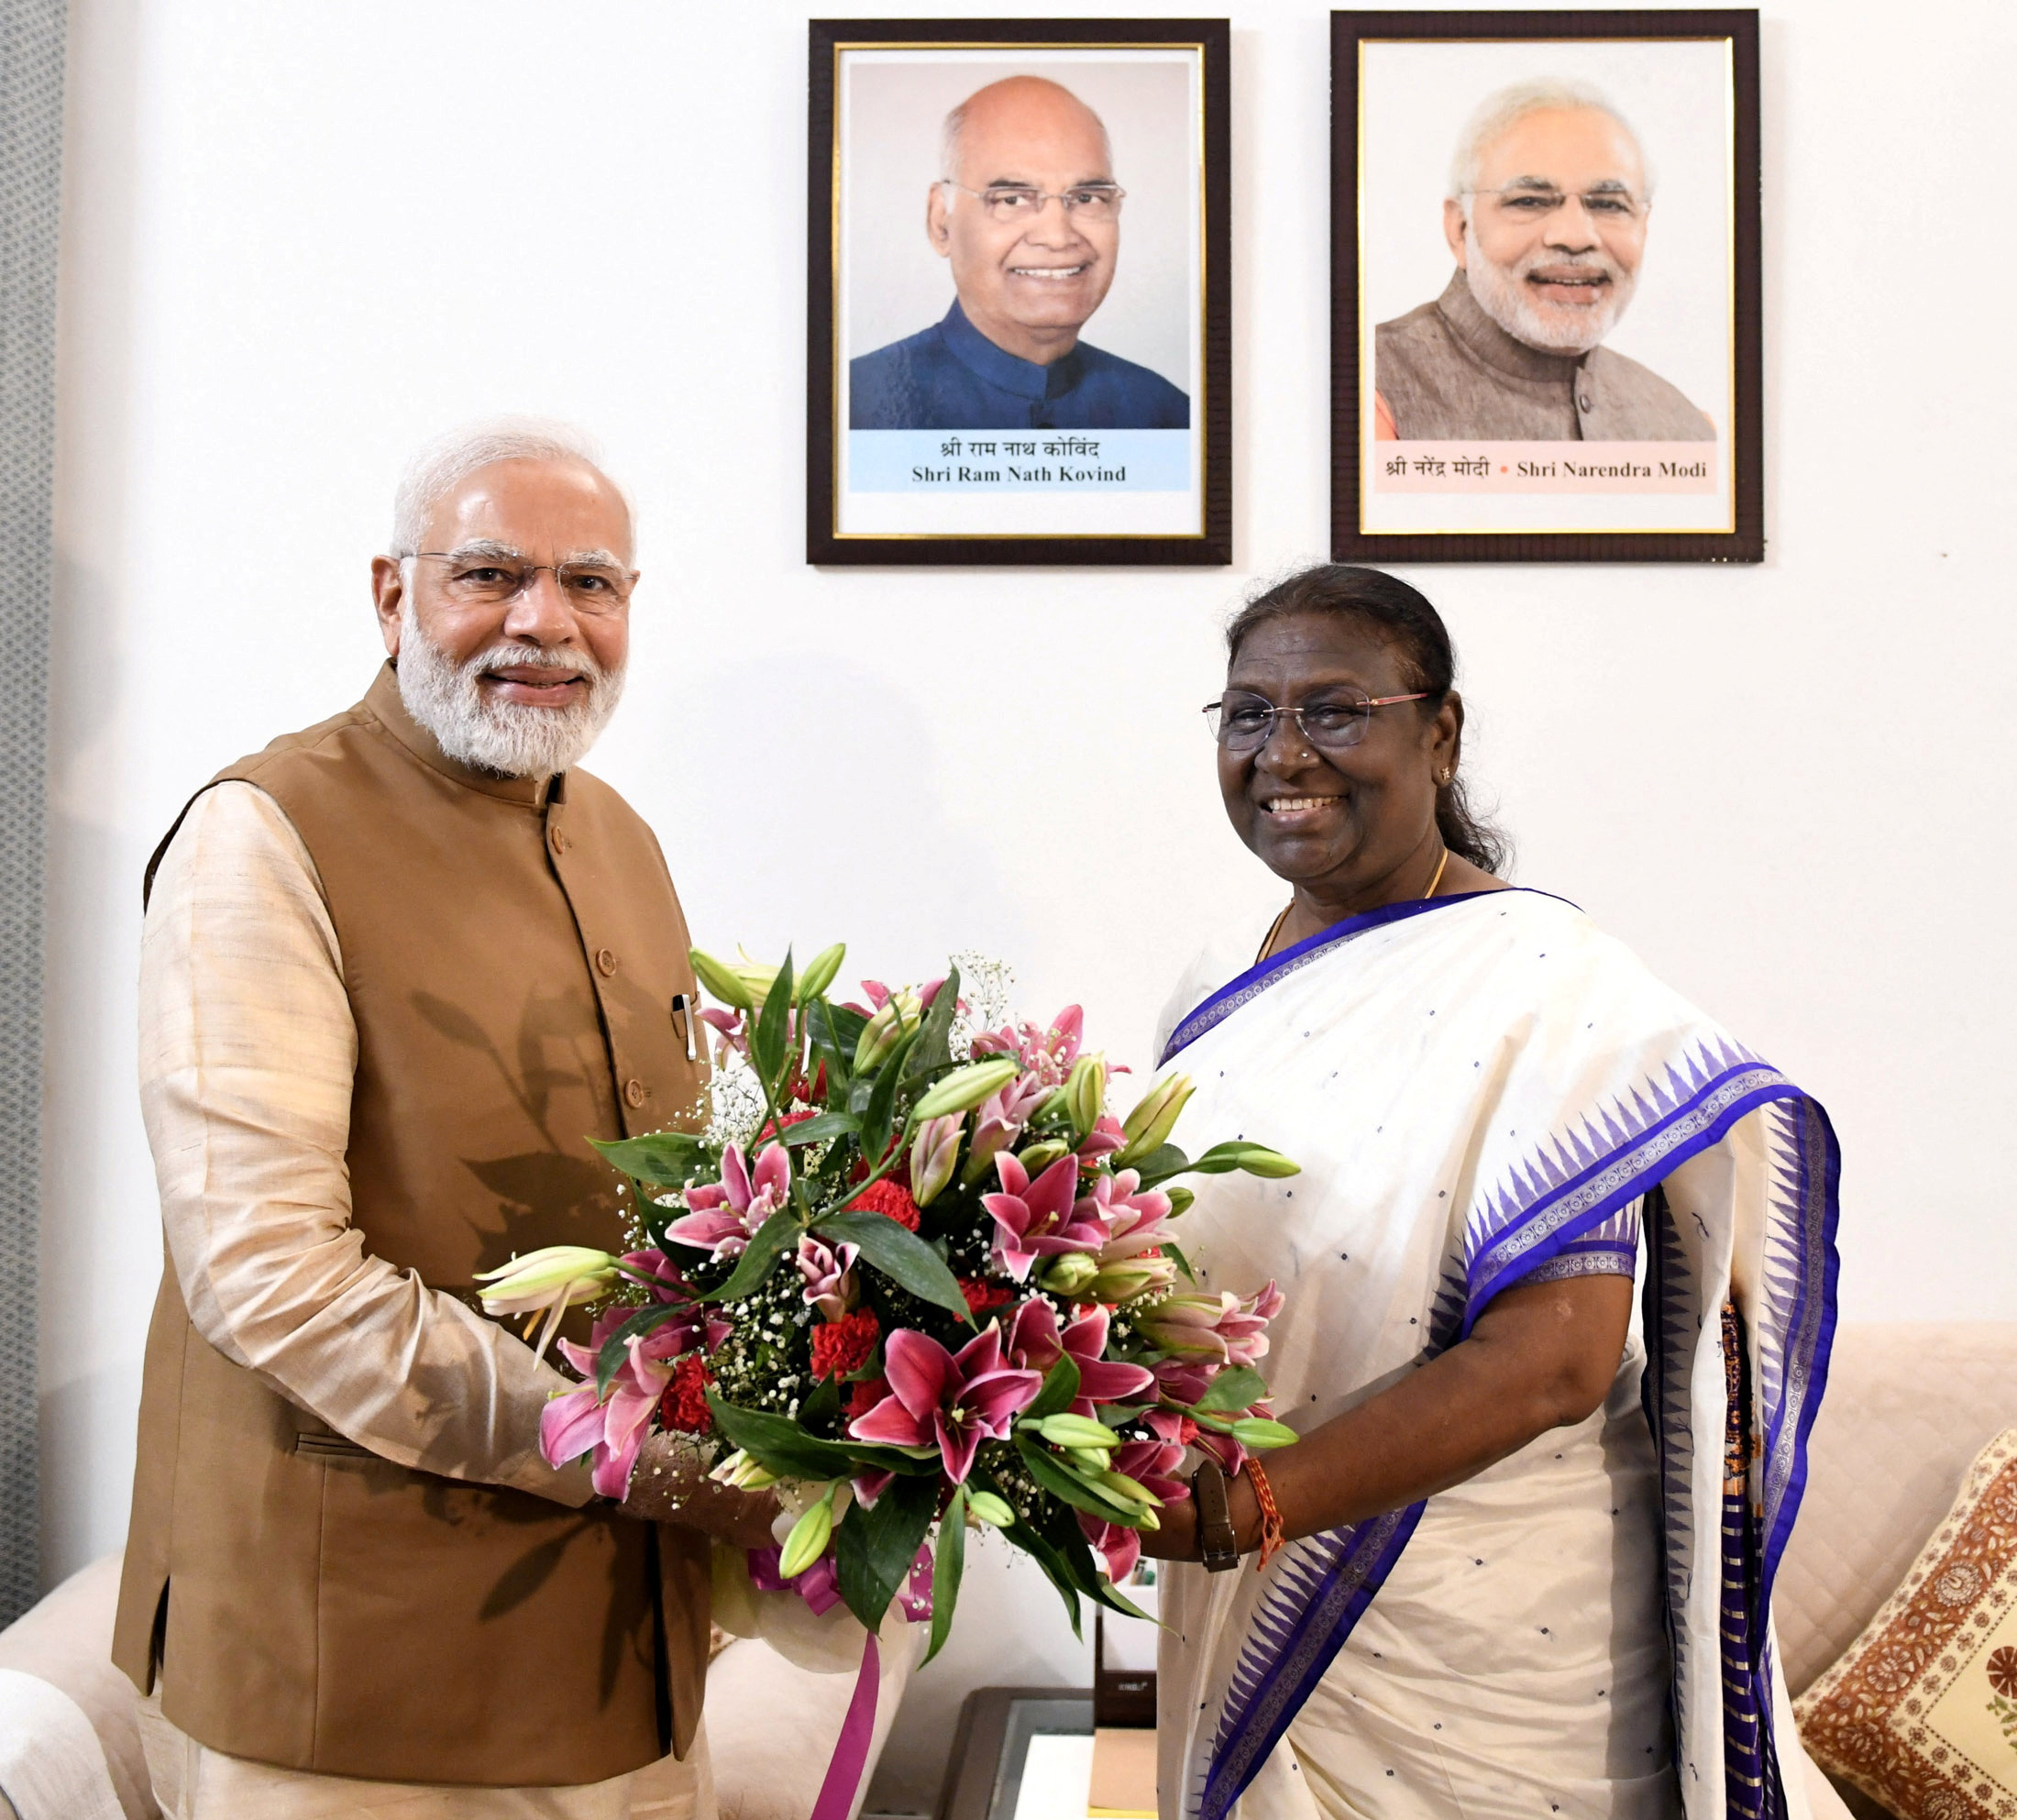 India's PM Modi congratulates Droupadi Murmu after she was elected as the country's first president from the tribal community, in New Delhi